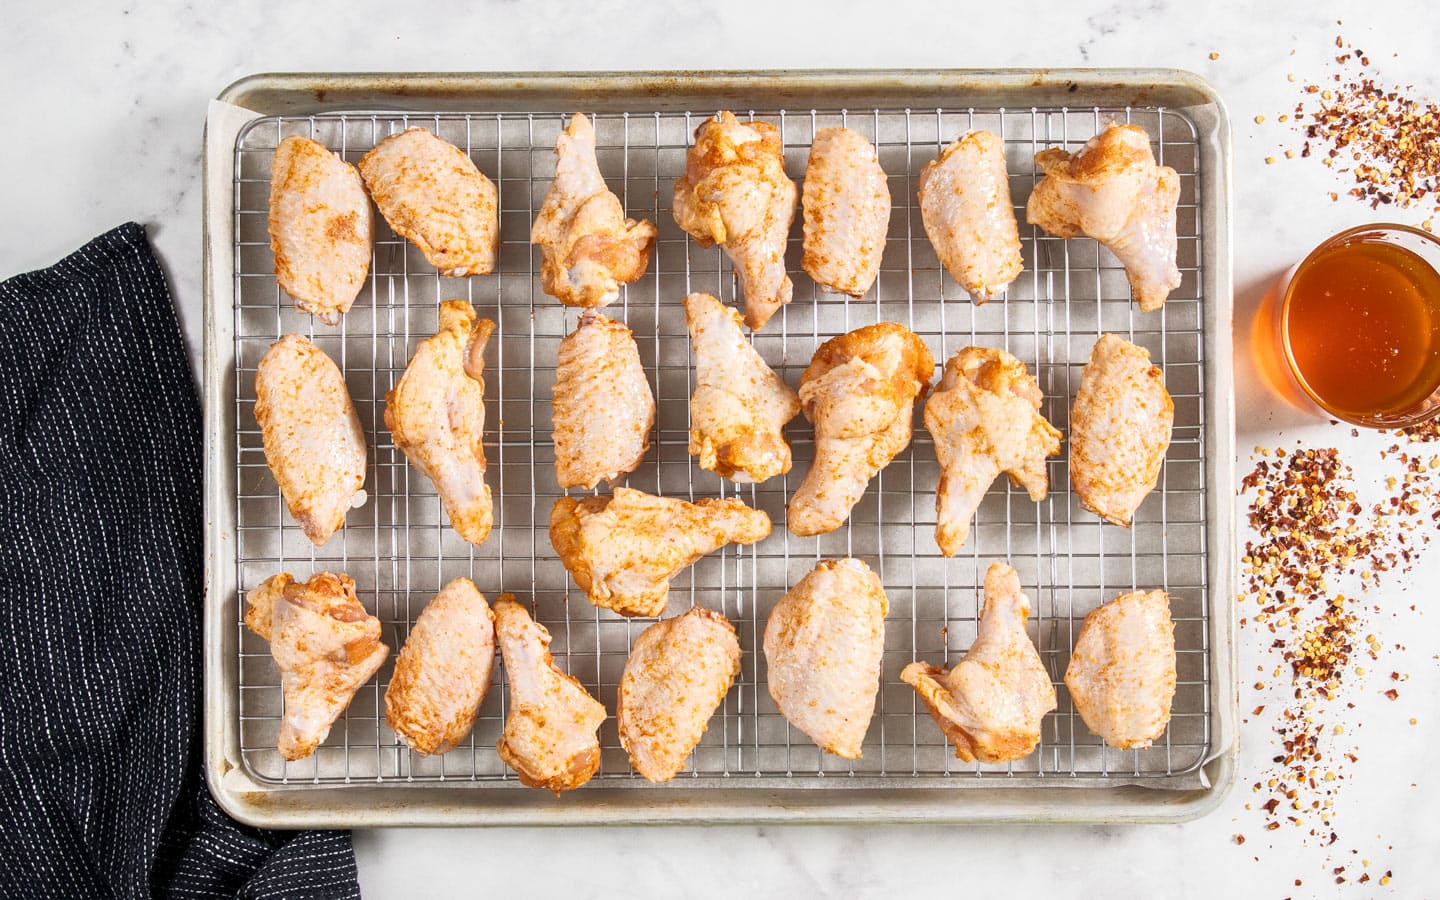 The seasoned wing pieces on a baking tray.